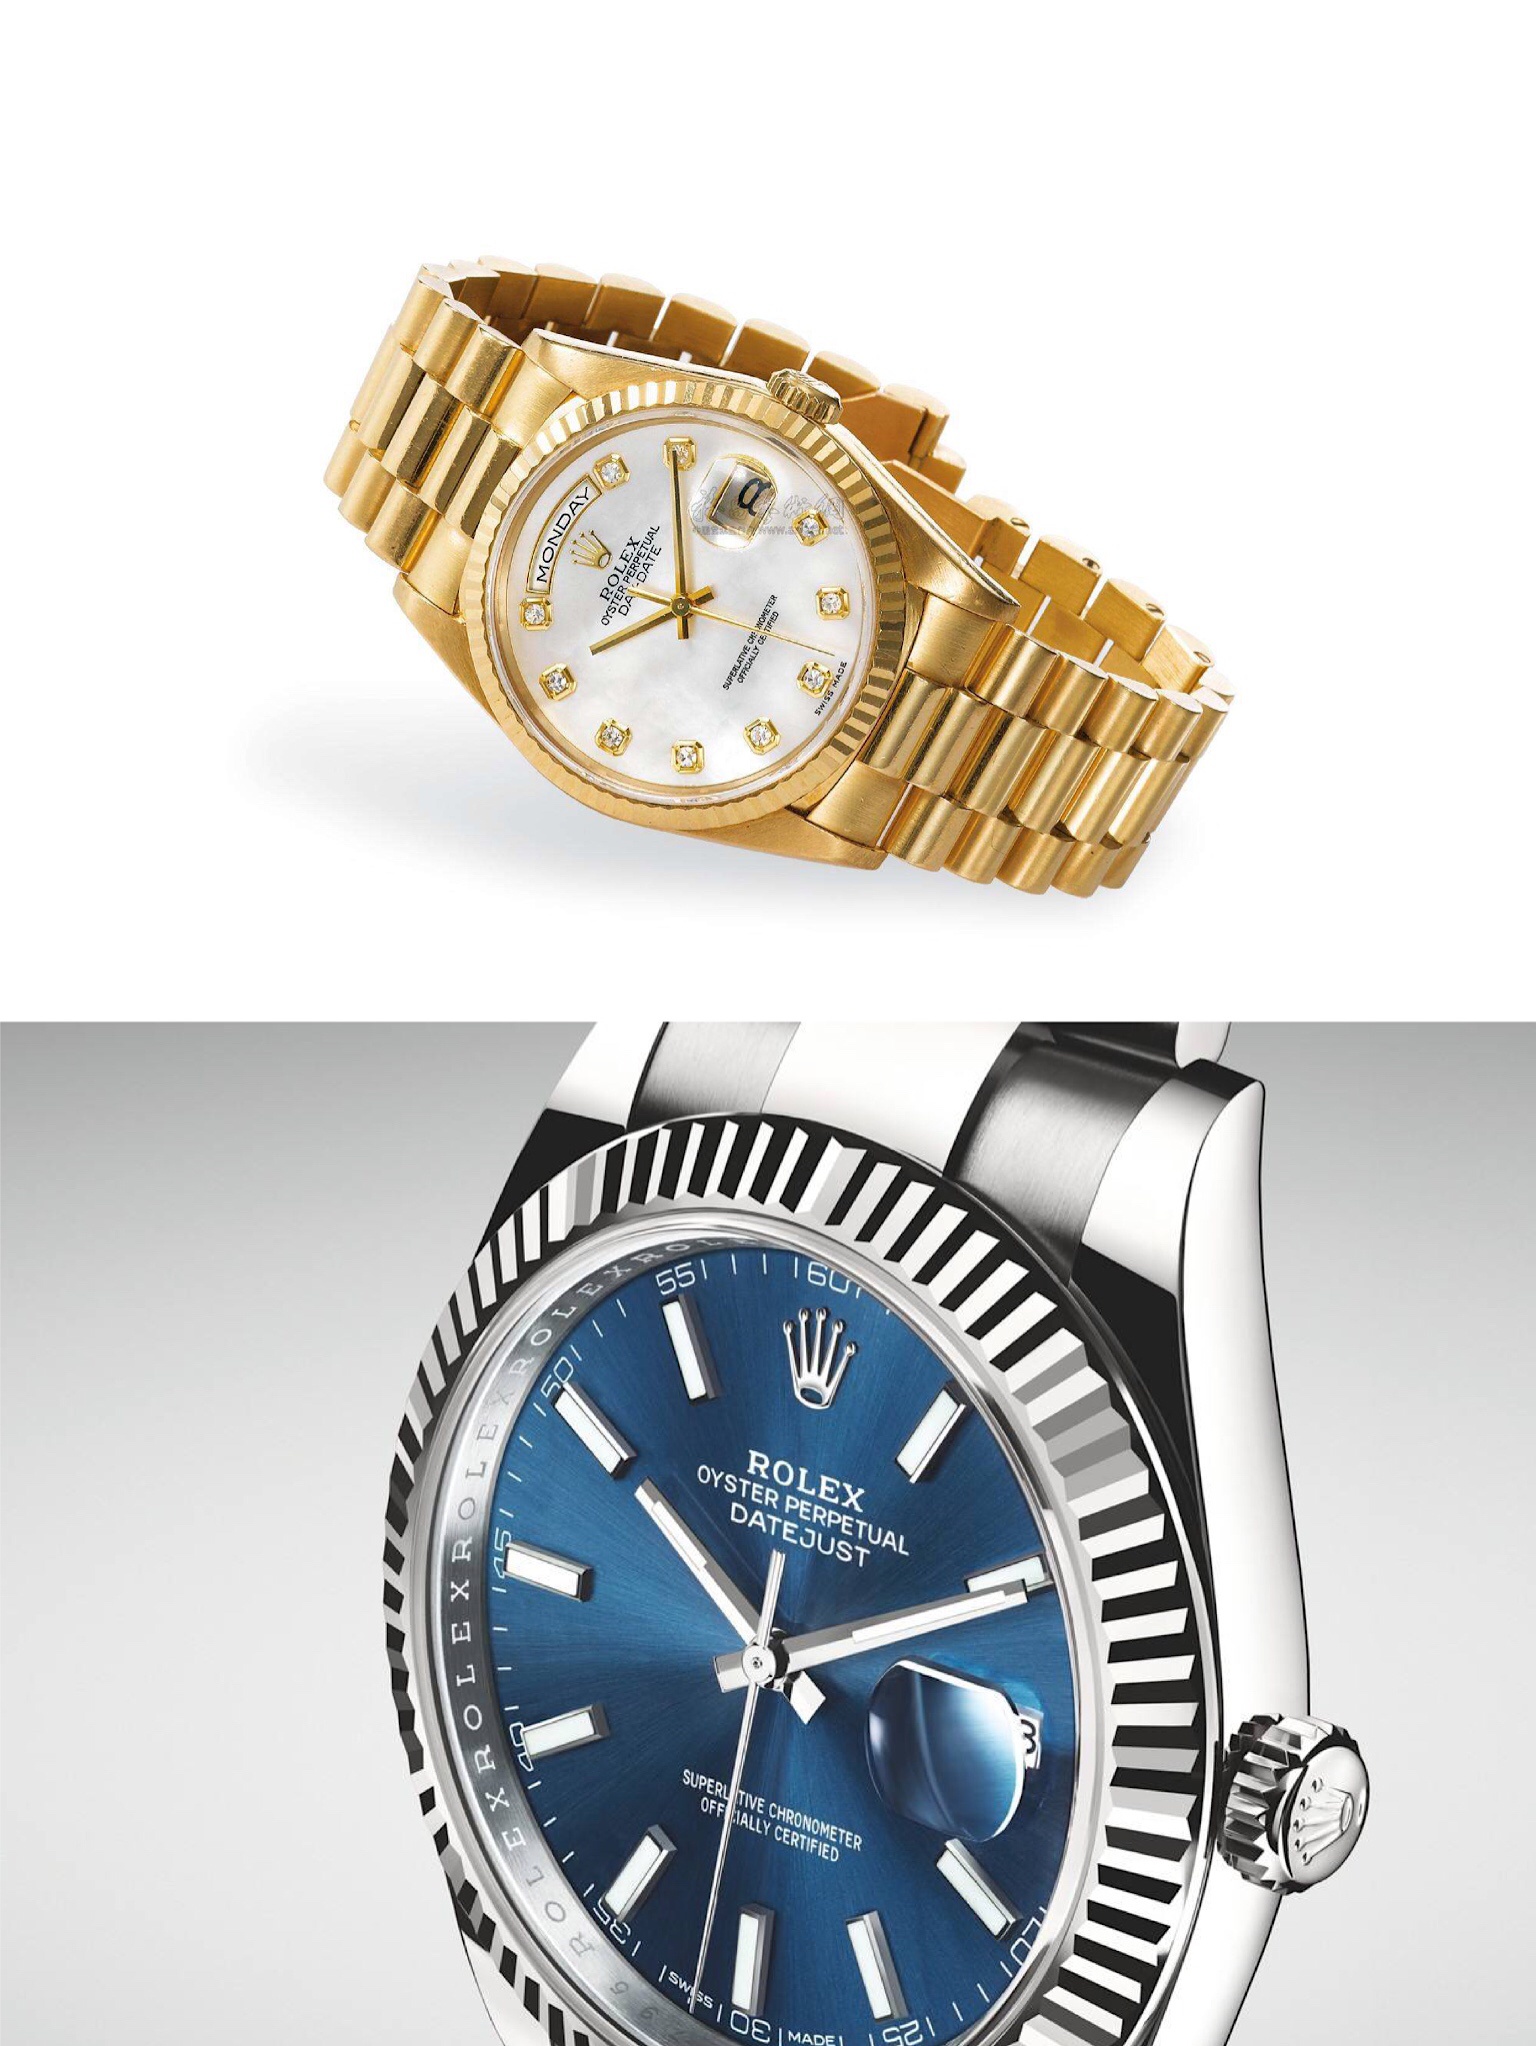 Why do everyone love great Swiss Replica Rolex Watches?